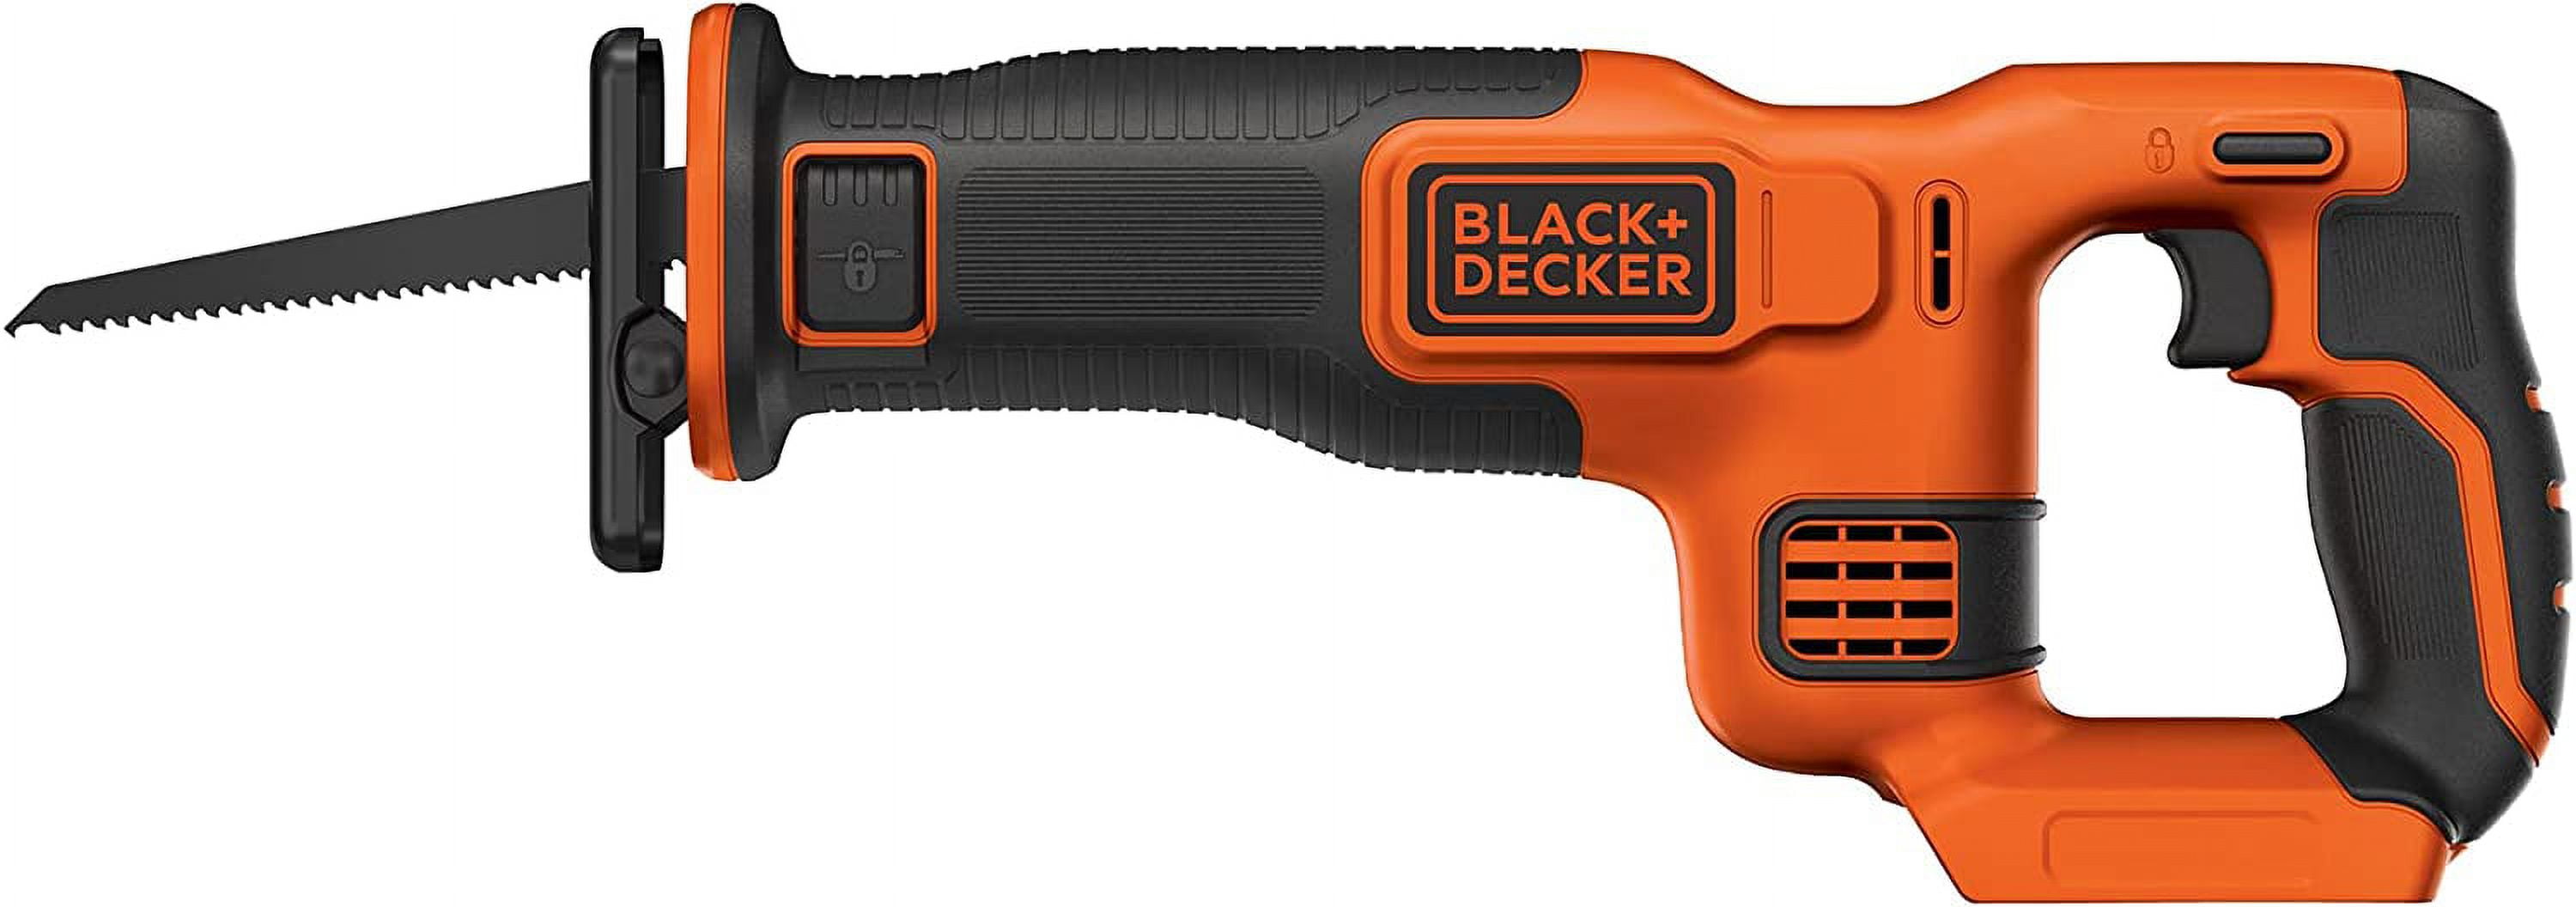 BLACK+DECKER 20V MAX* POWERCONNECT 7/8 in. Cordless Reciprocating Saw  (BDCR20B) Reciprocating Saw, tool only 